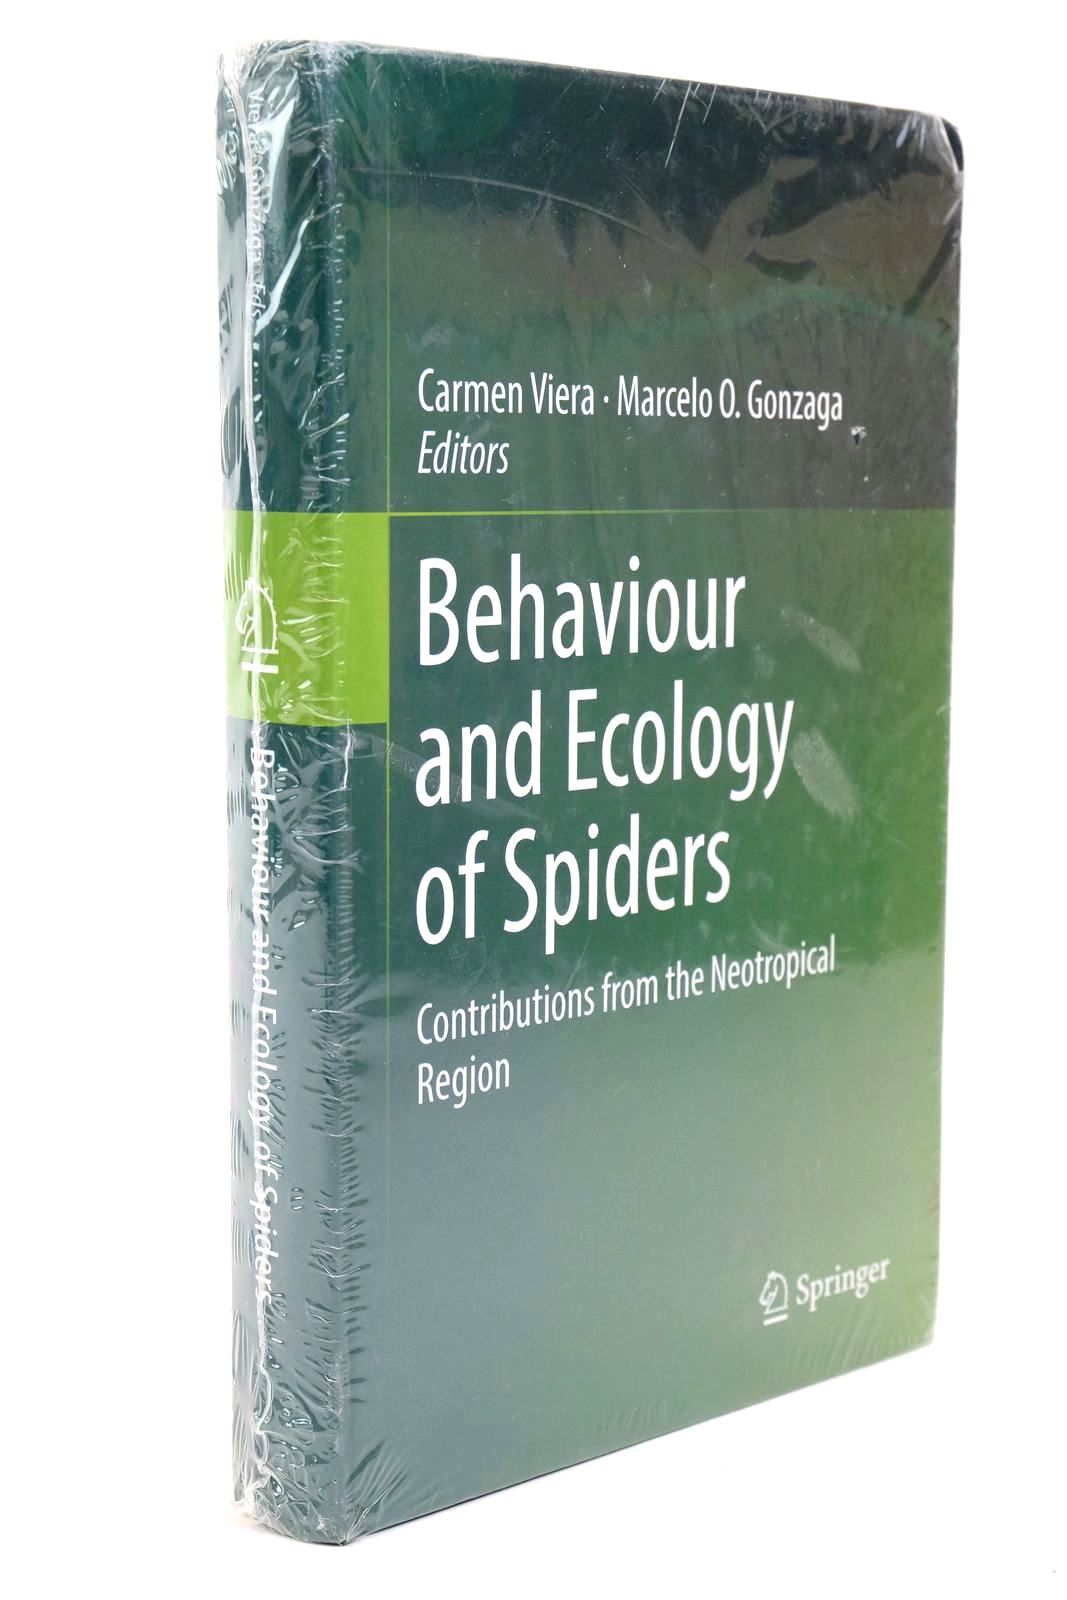 Photo of BEHAVIOUR AND ECOLOGY OF SPIDERS written by Viera, Carmen Gonzaga, Marcelo O. published by Springer (STOCK CODE: 1323036)  for sale by Stella & Rose's Books